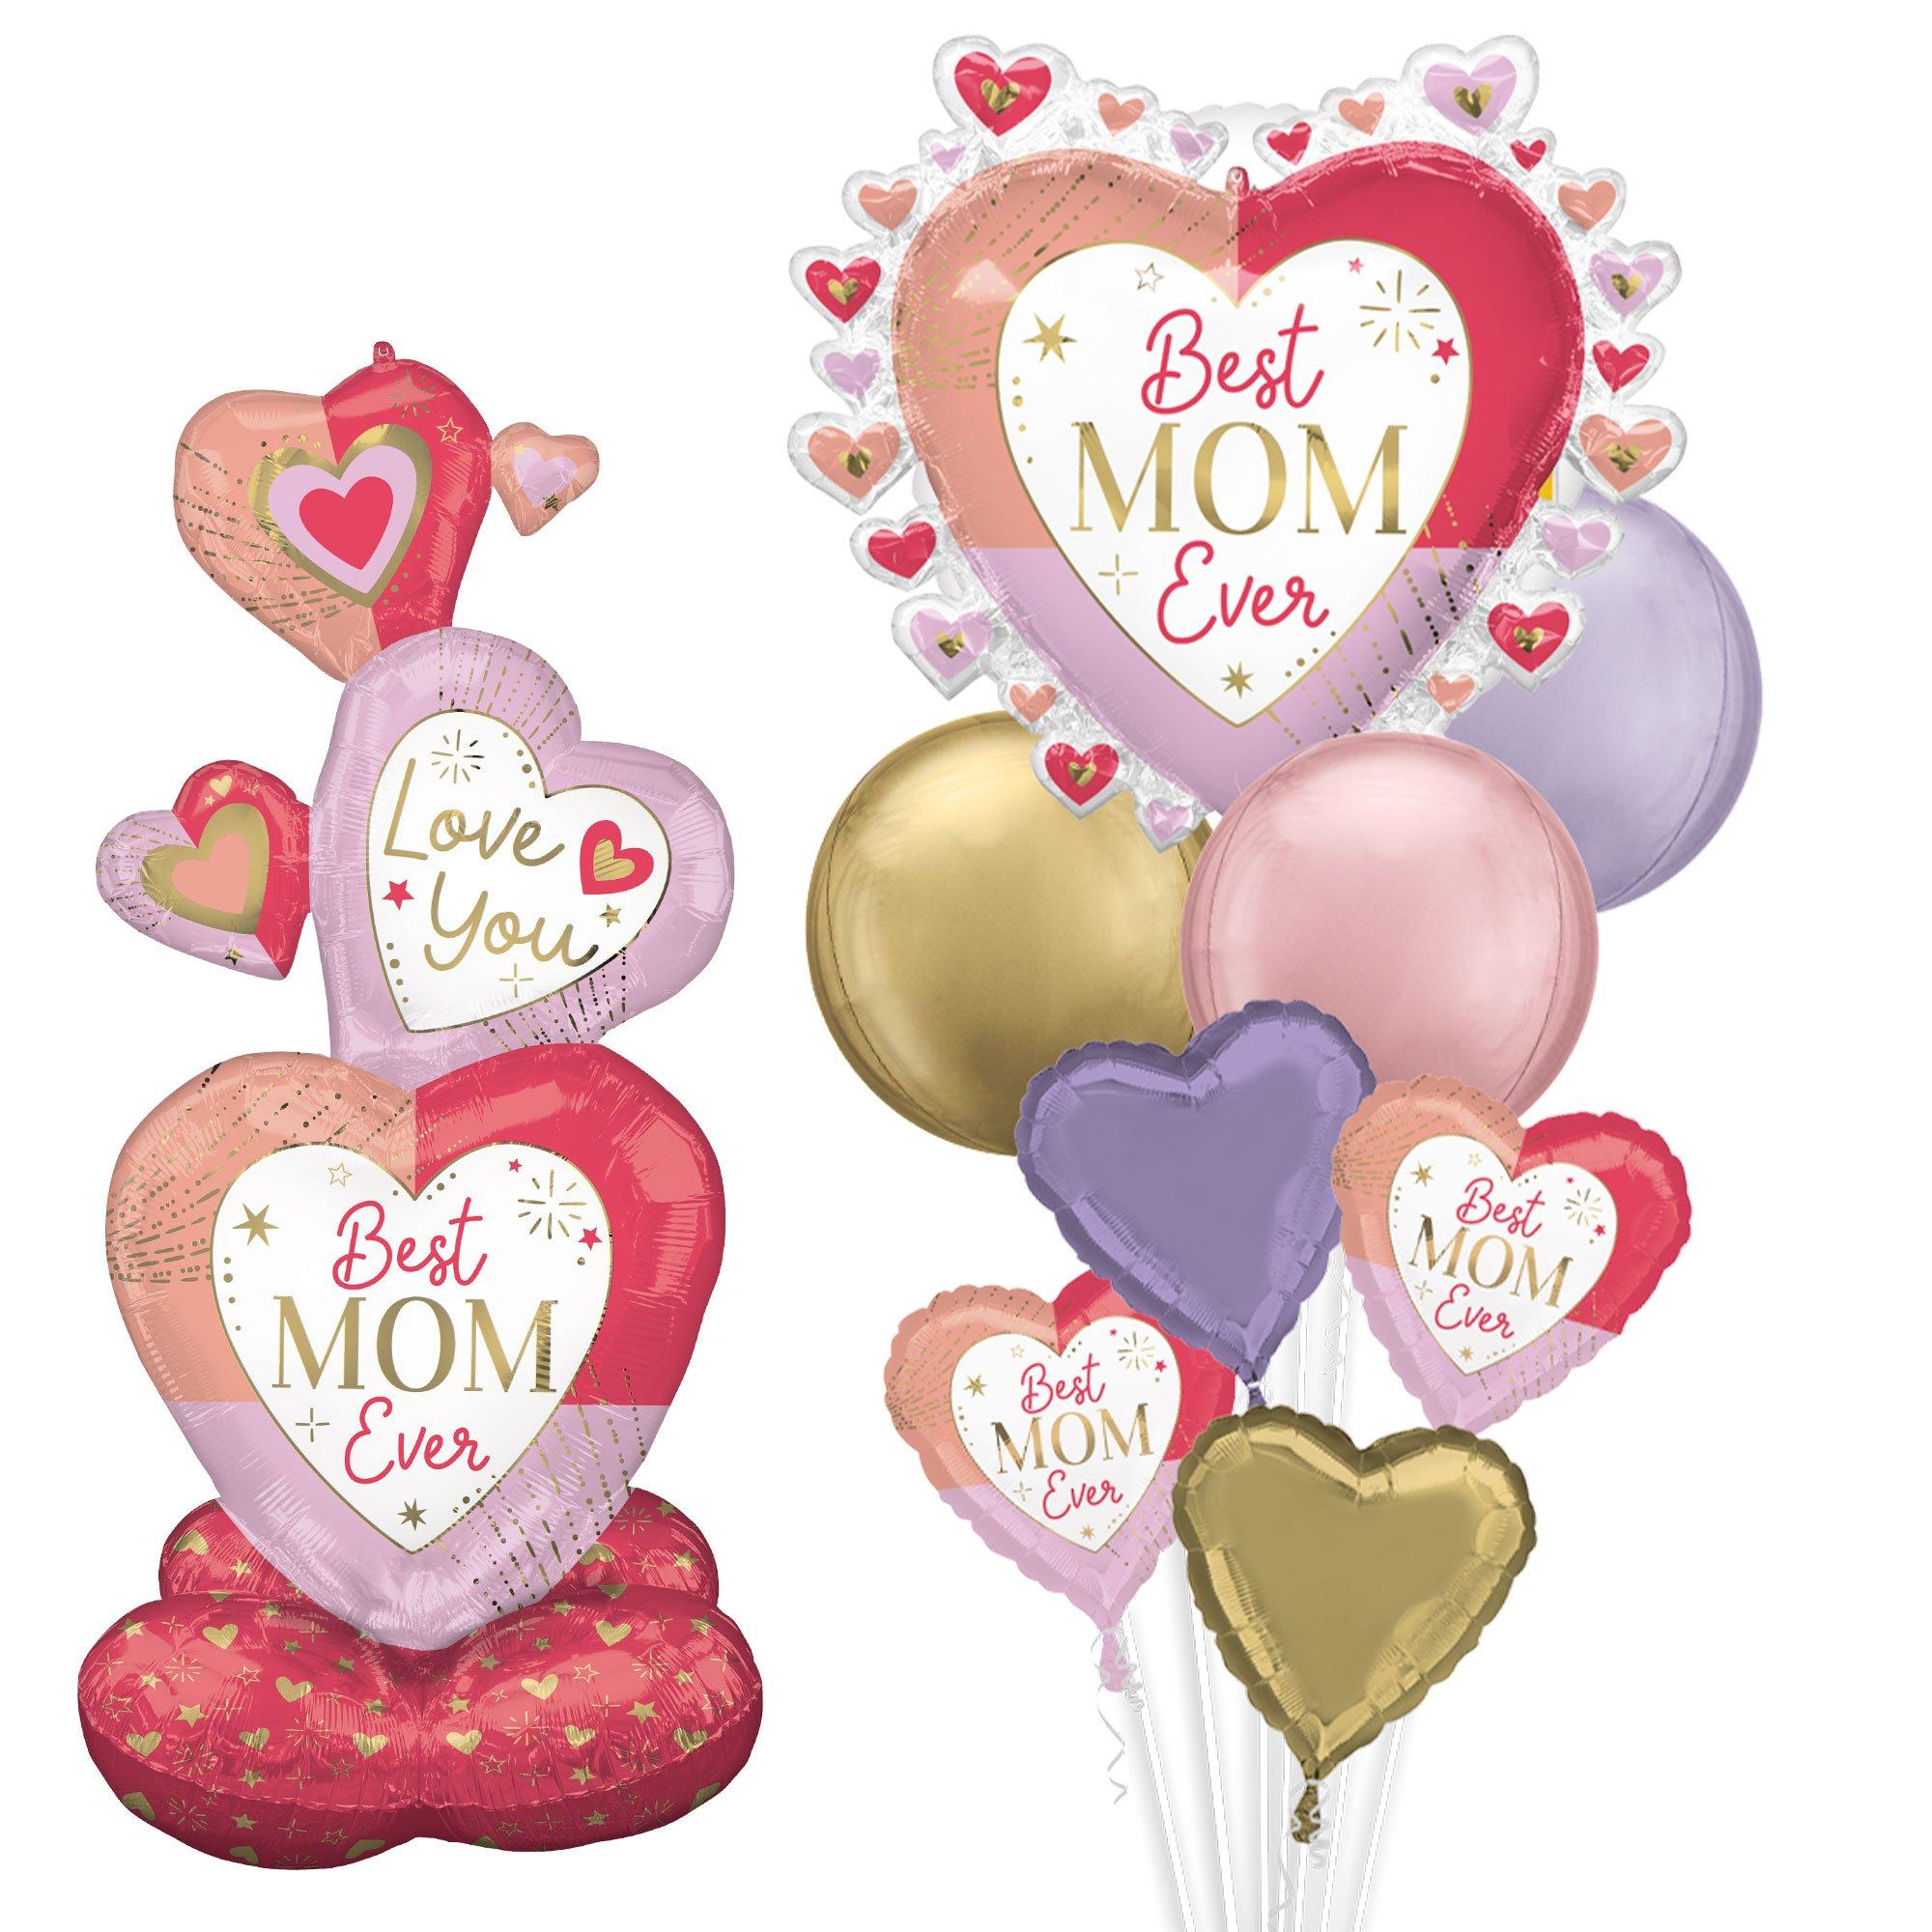 AirLoonz Colorful Stacked Hearts & Colorful Mother's Day Balloon Bouquet Set, 9pc